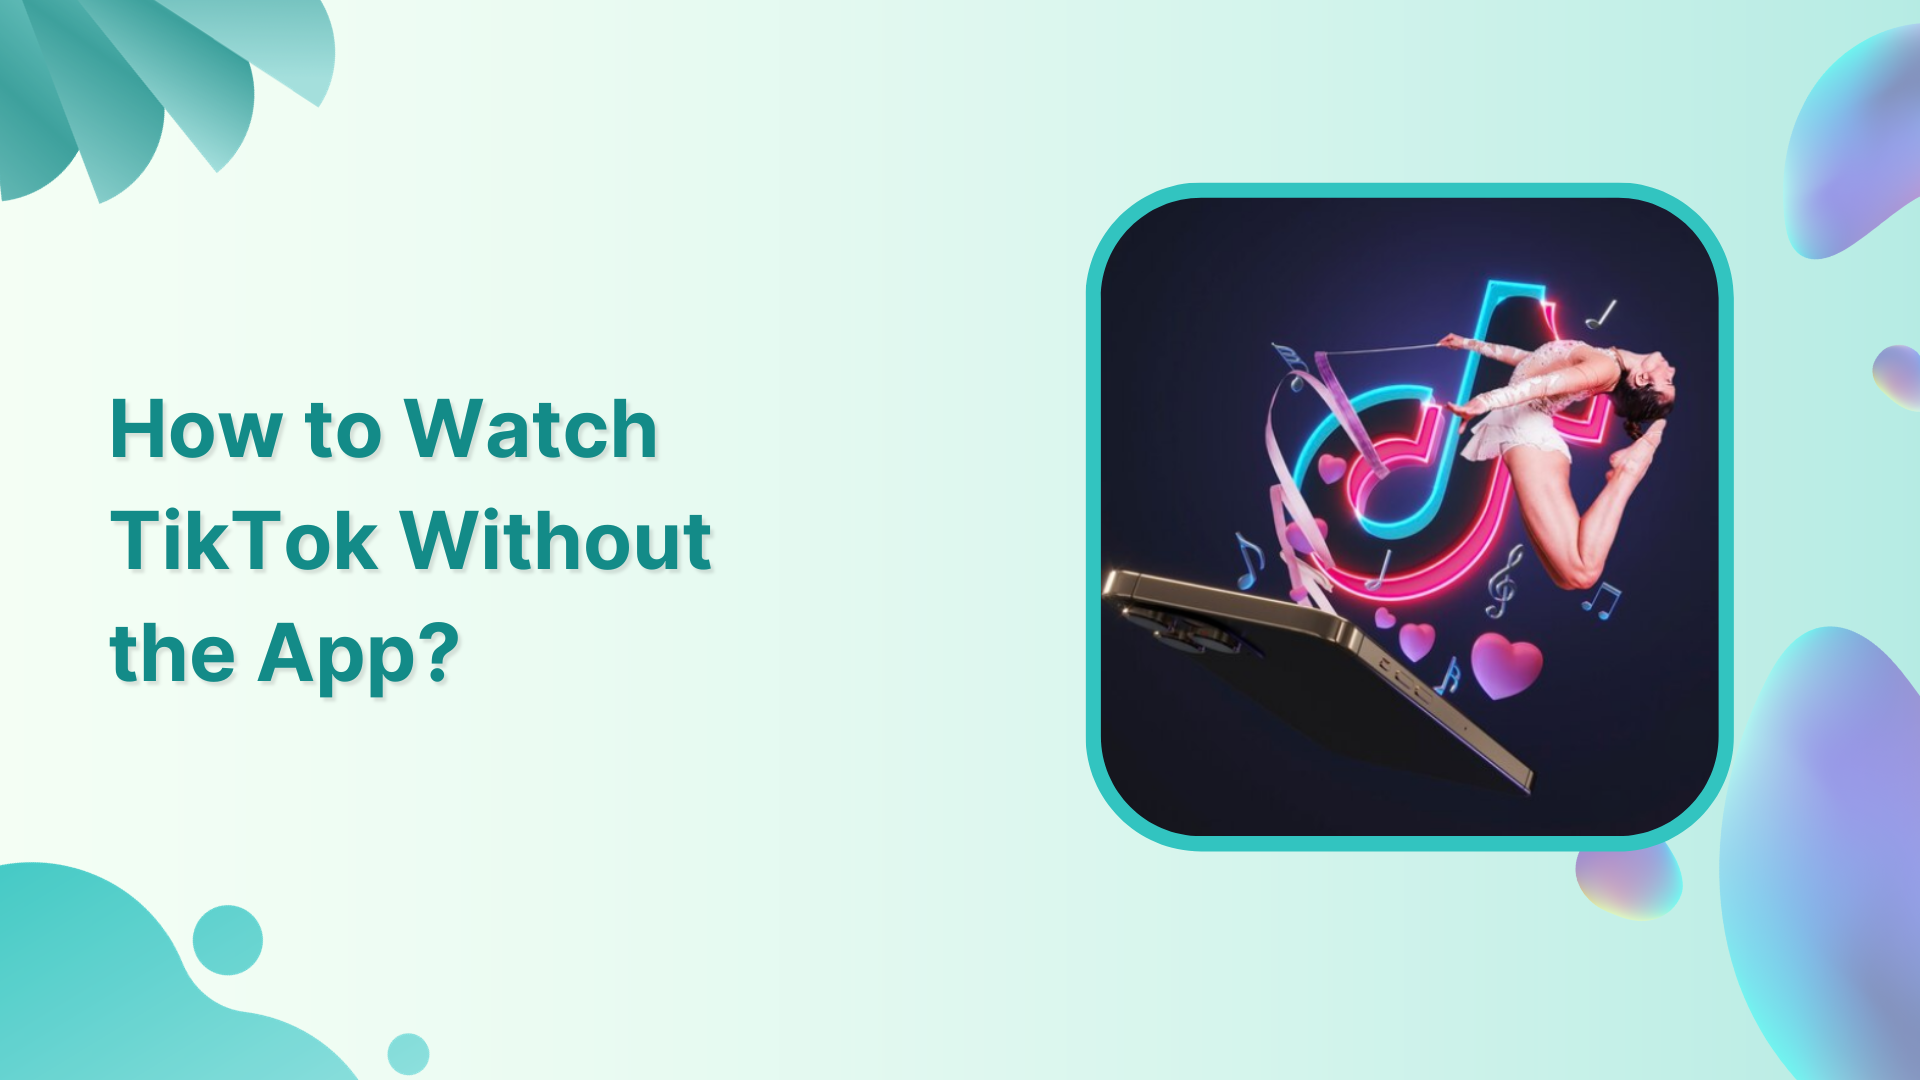 How to Watch TikTok Without the App?